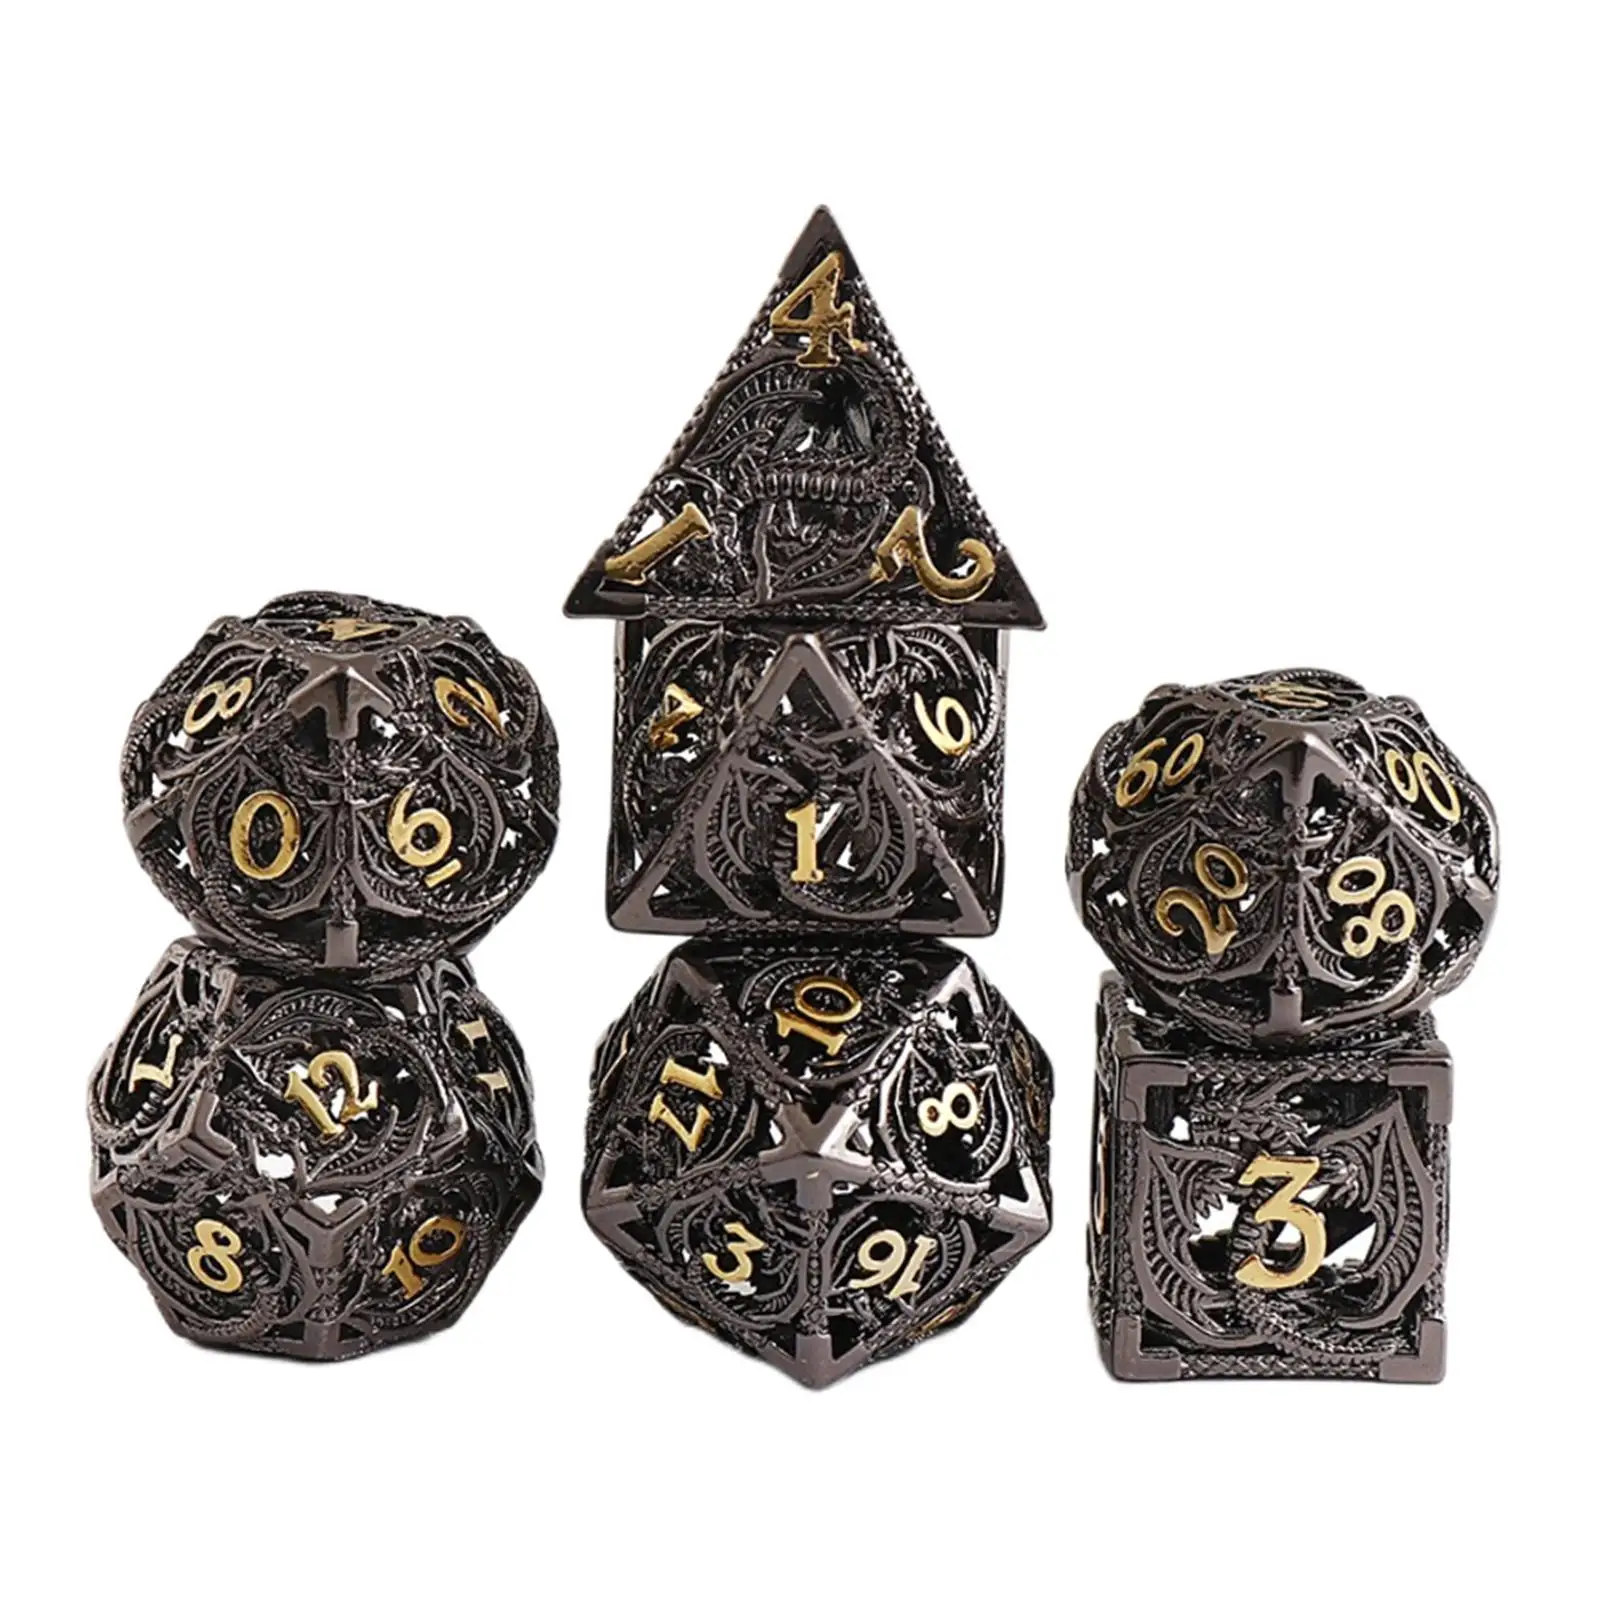 Metal Dice DND Set Role-playing D&D 7 Pure Copper Hollow Polyhedral Dice Suitable For DND RPG w/Metal Box